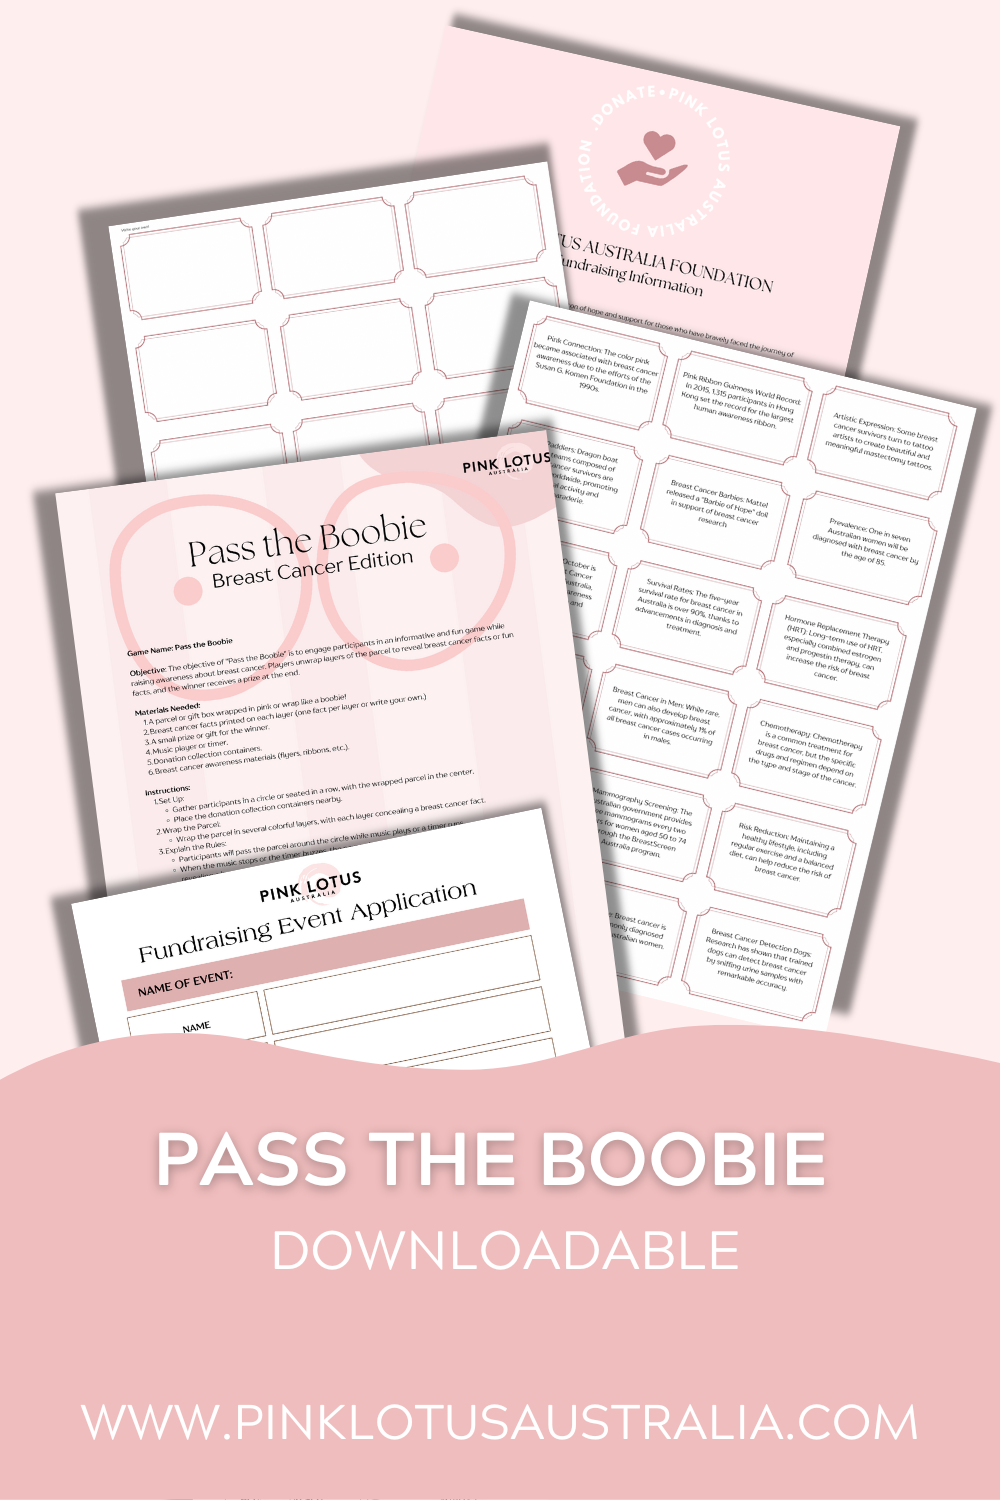 Downloadable- ‘Pass the Boobie’ FREE